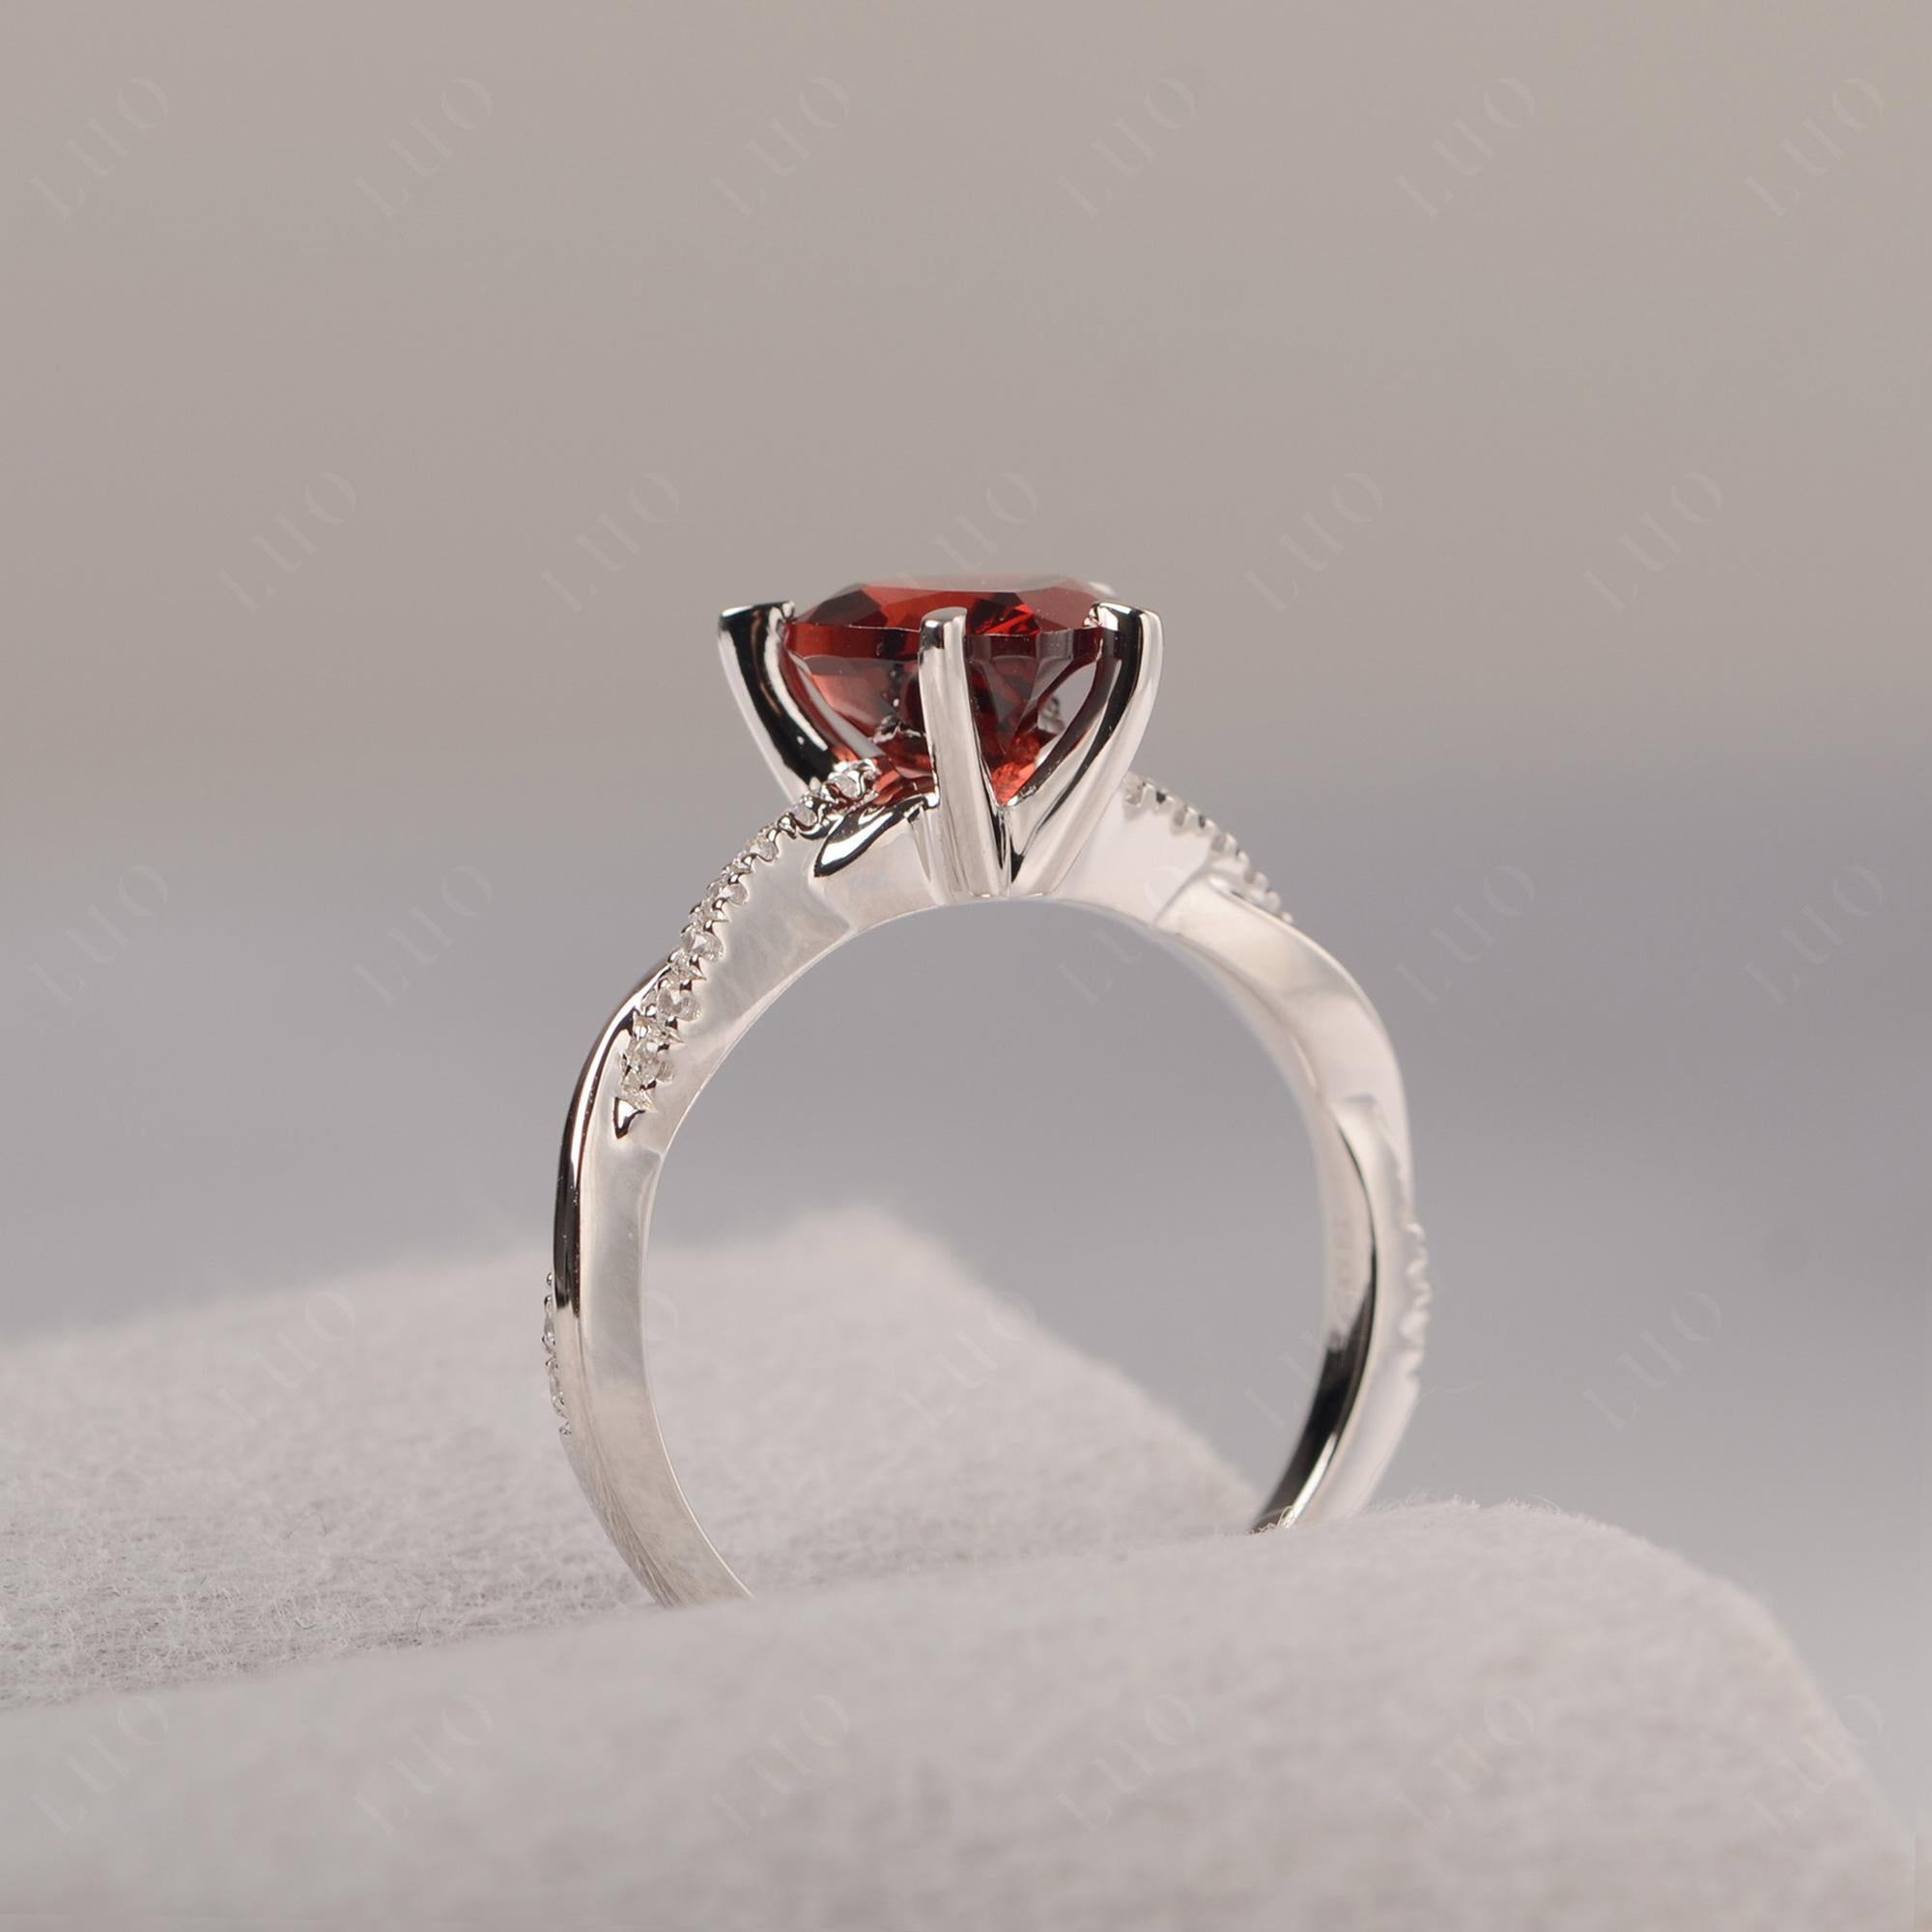 Twisted Heart Shaped Garnet Ring - LUO Jewelry